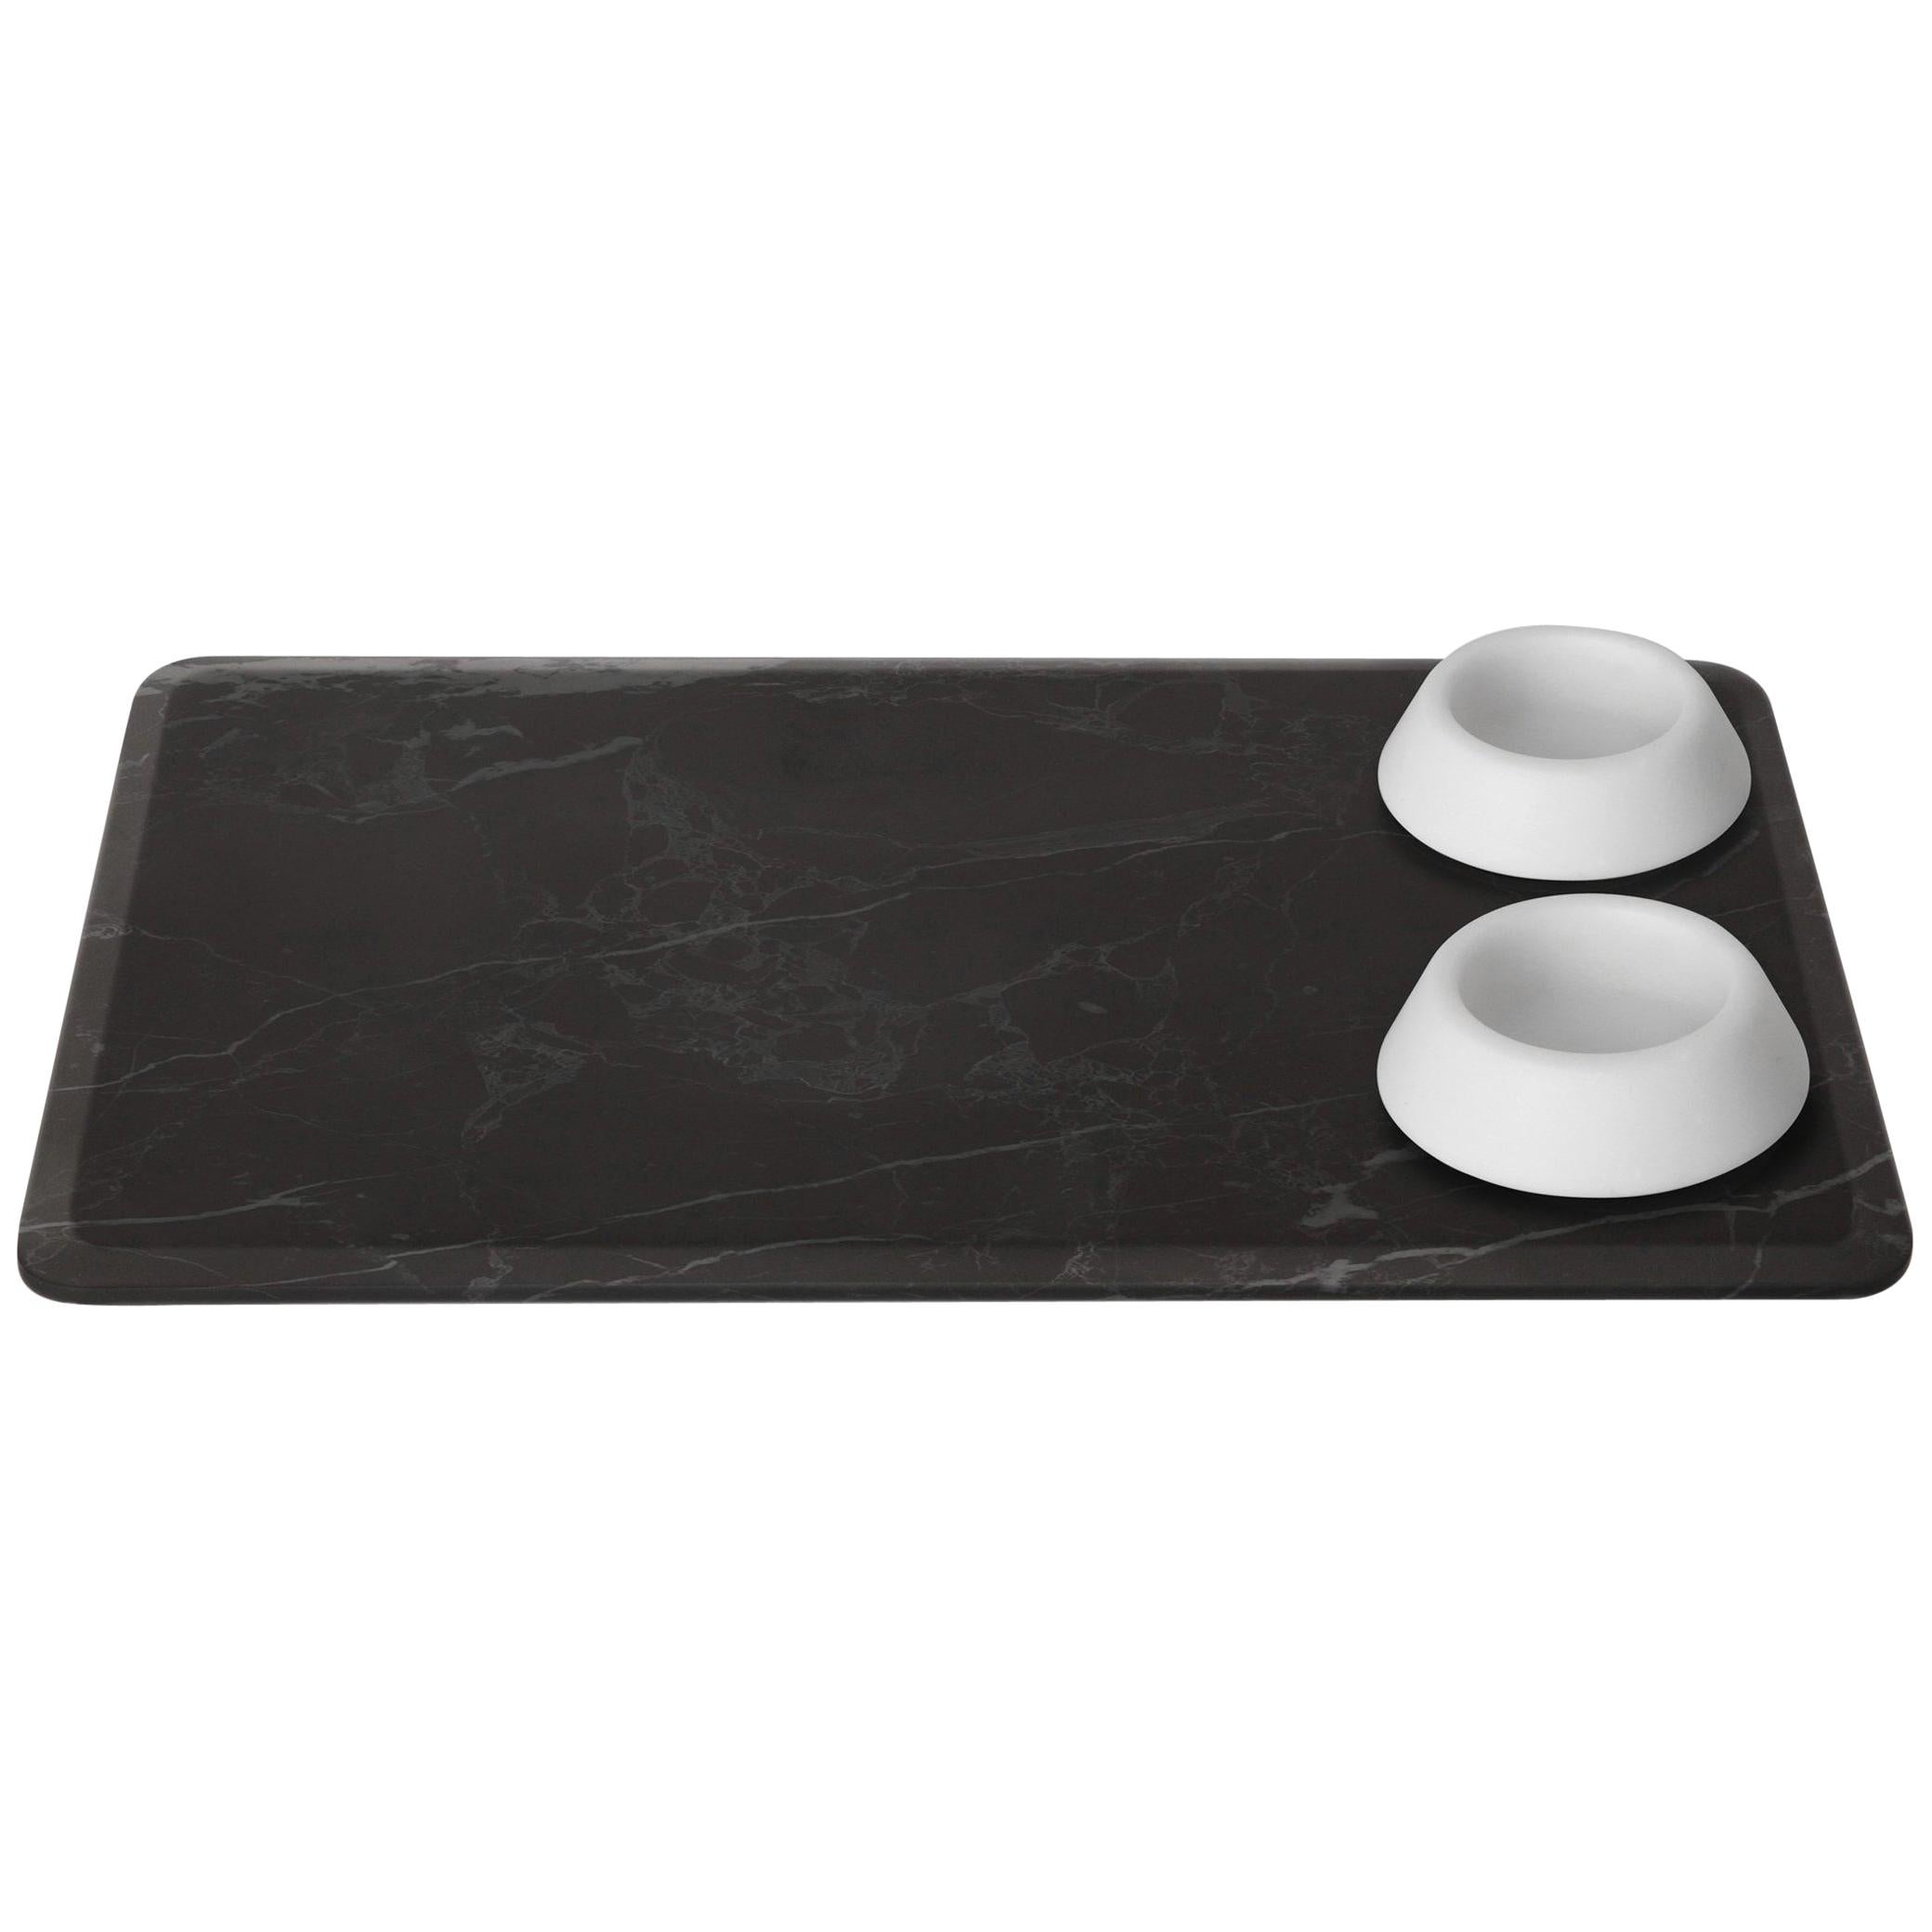 New Modern Serving Platter with Bowls in Marble creator Ivan Colominas